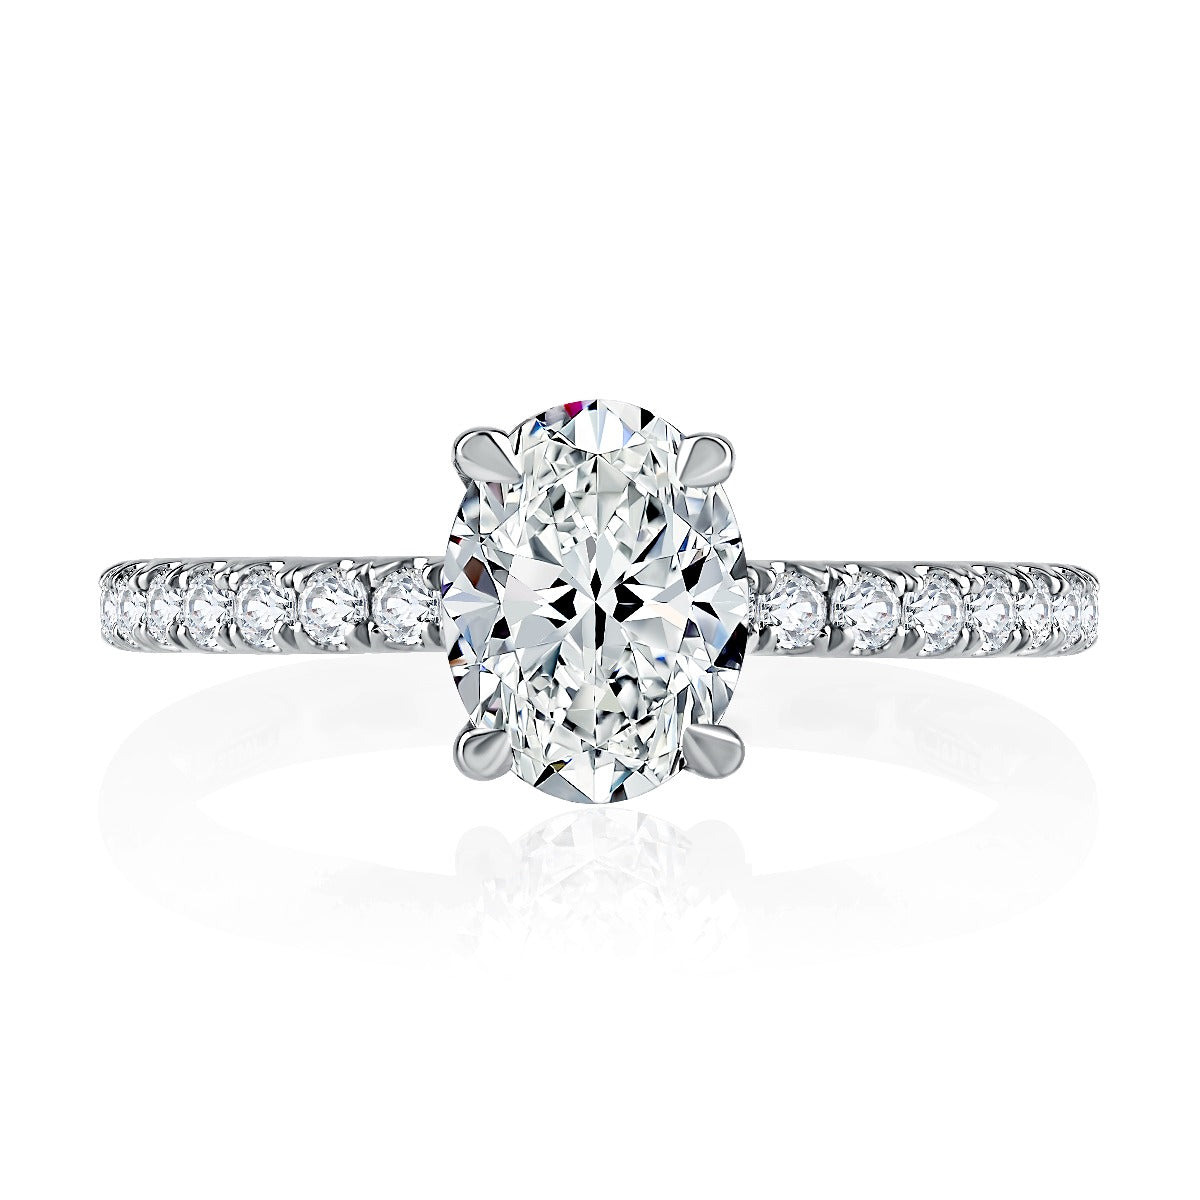 Diamond Pavé Engagement Ring with Quilted Interior